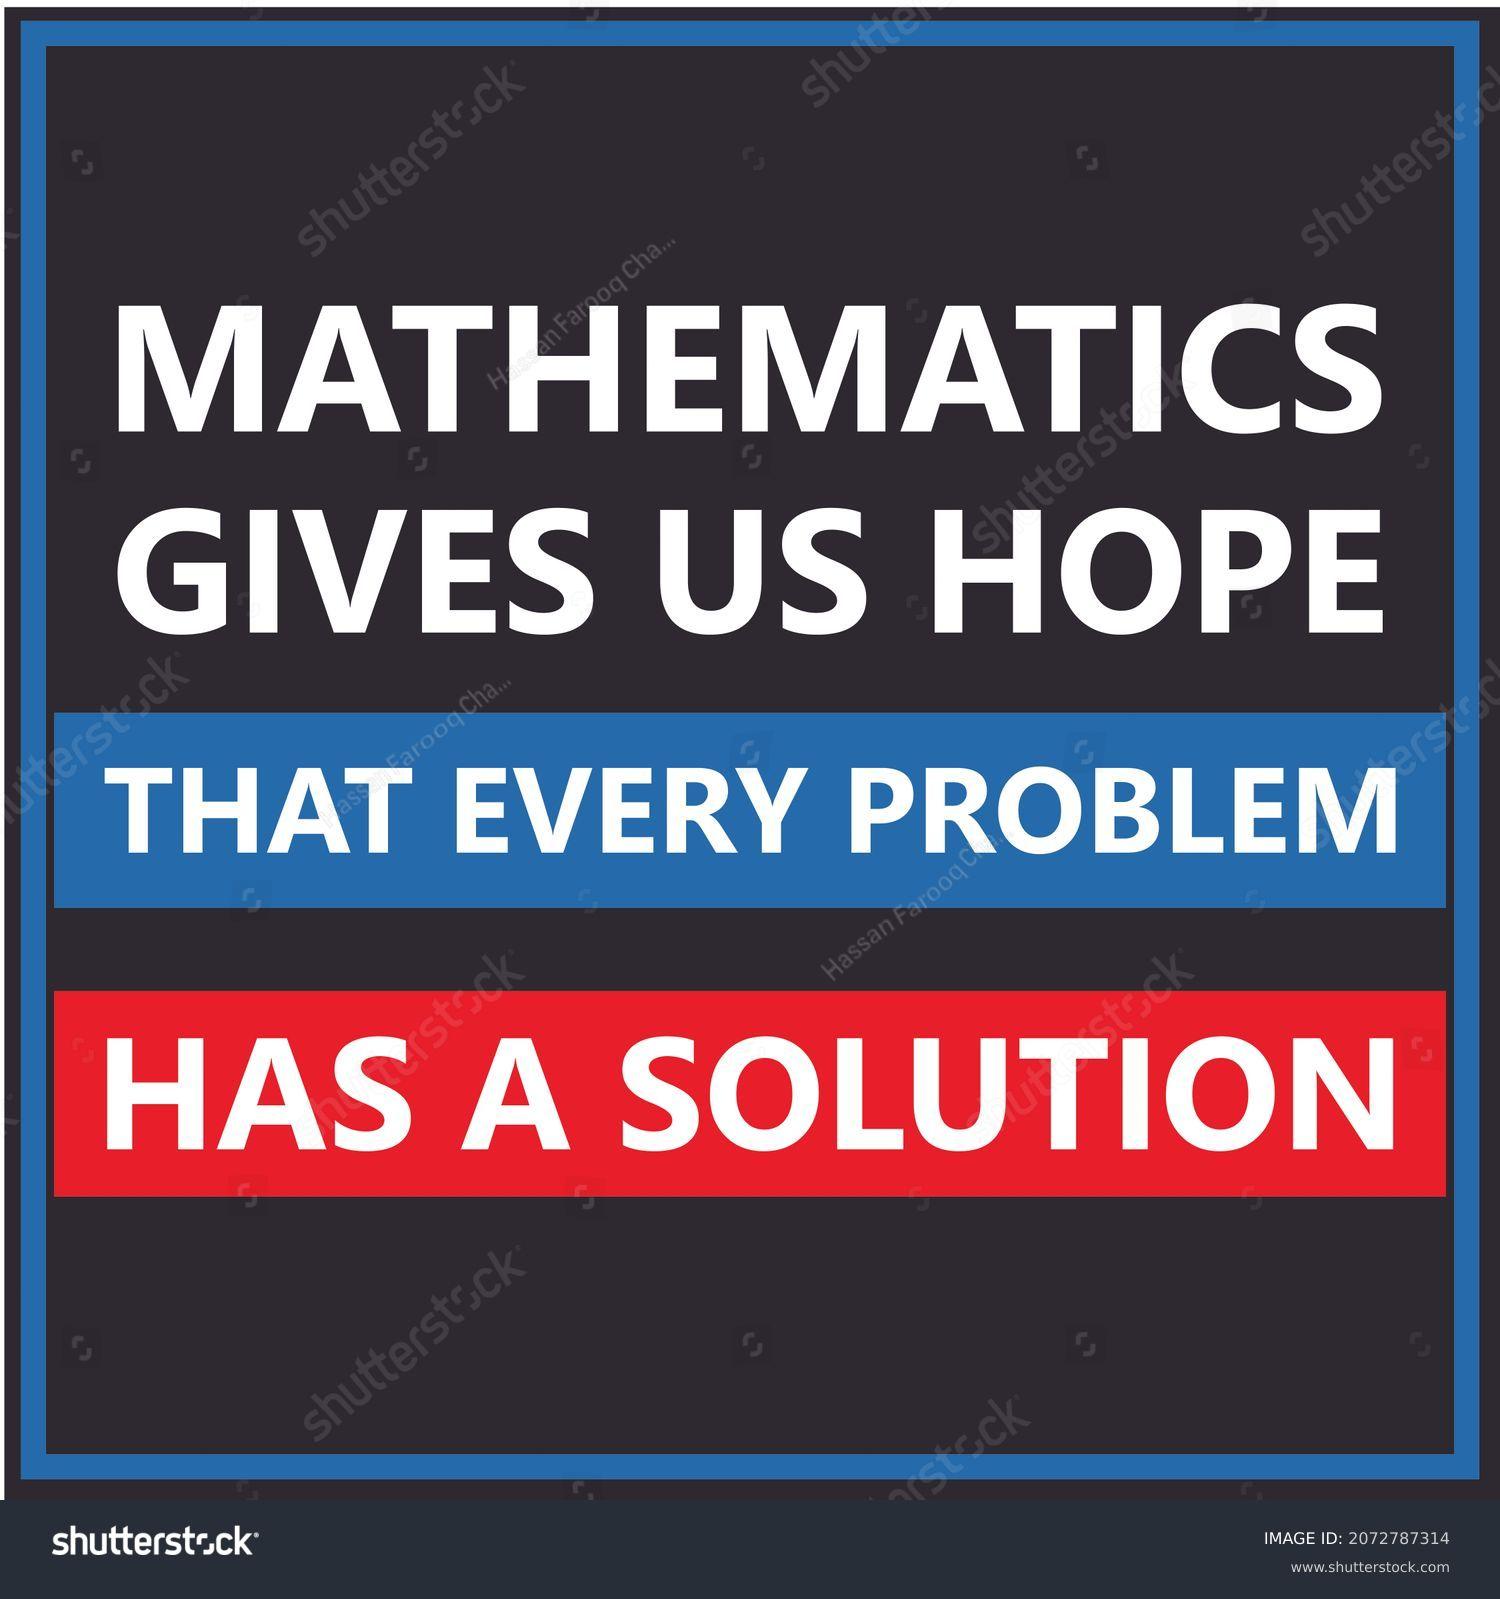 free-download-math-quotes-images-stock-photos-3d-objects-vectors